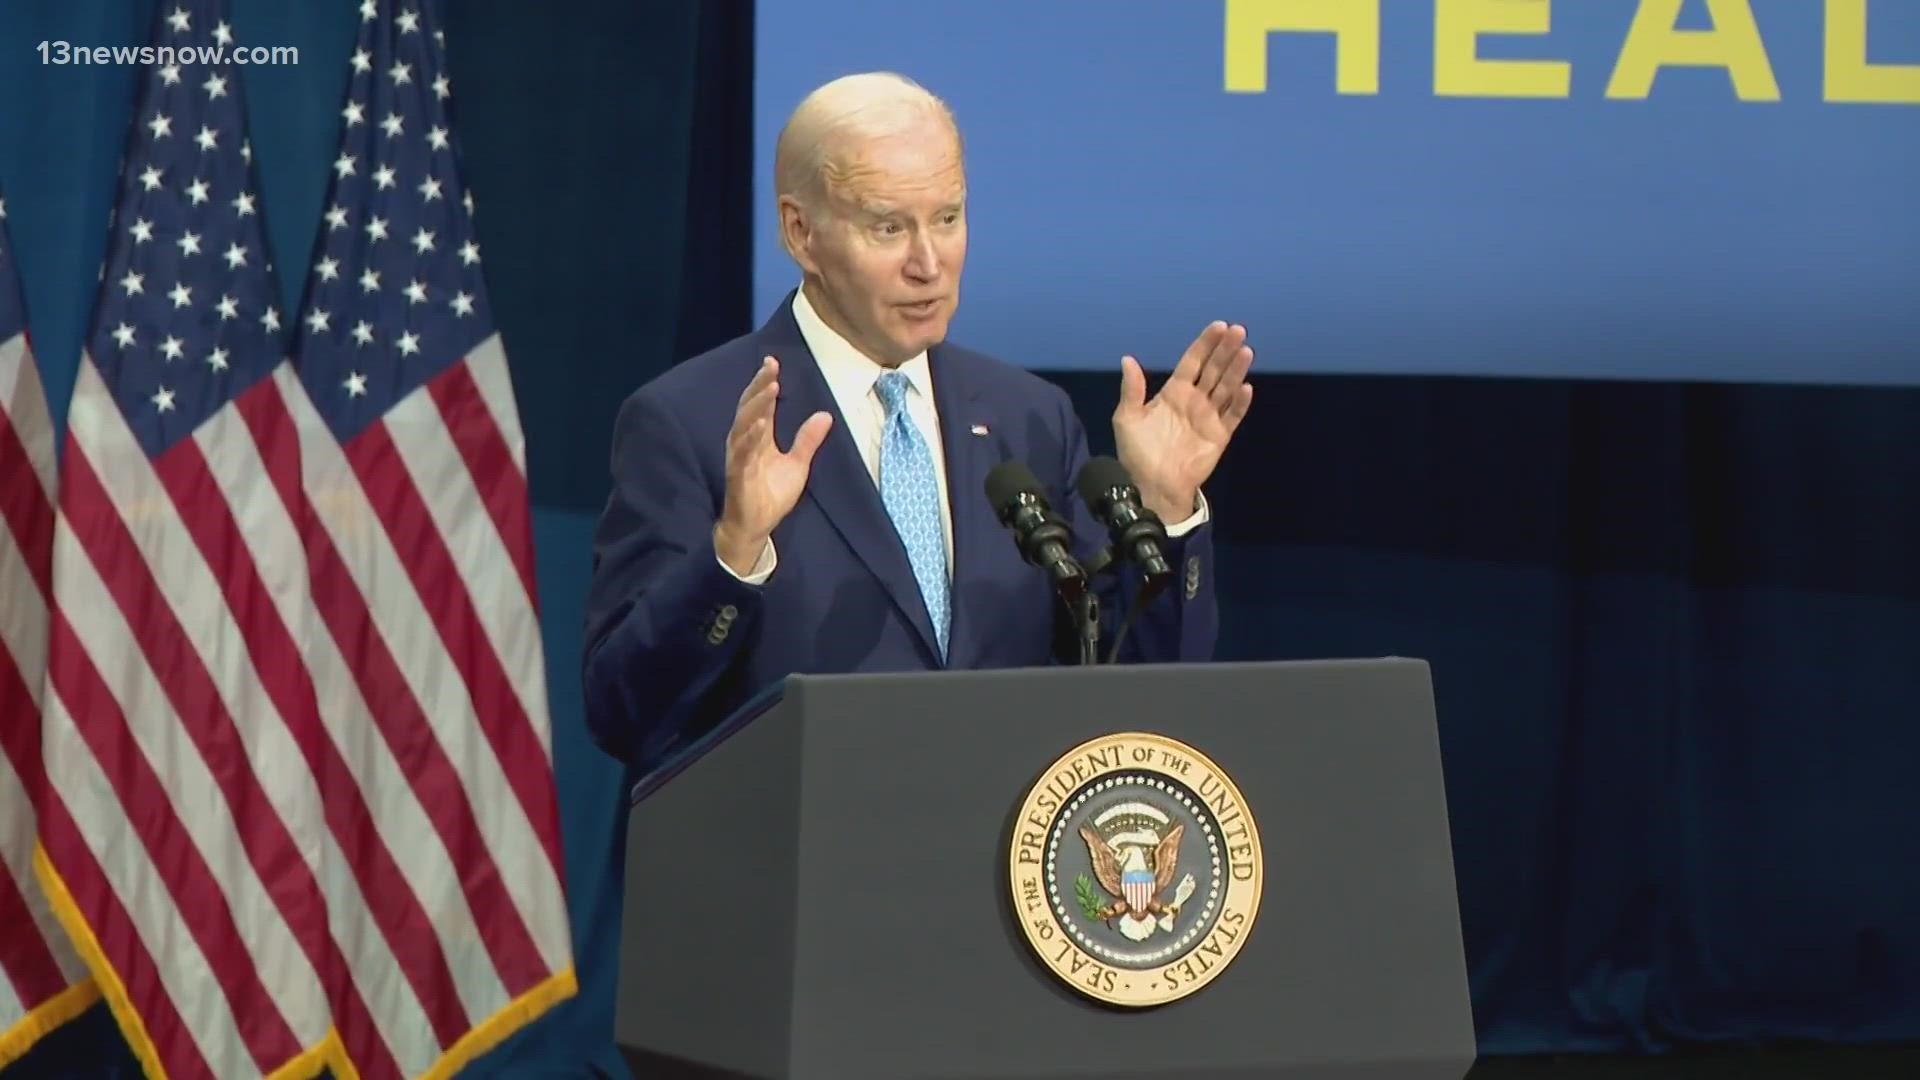 Roughly two years since his last visit to Hampton Roads, President Joe Biden spoke in front of hundreds in Virginia Beach Tuesday afternoon.